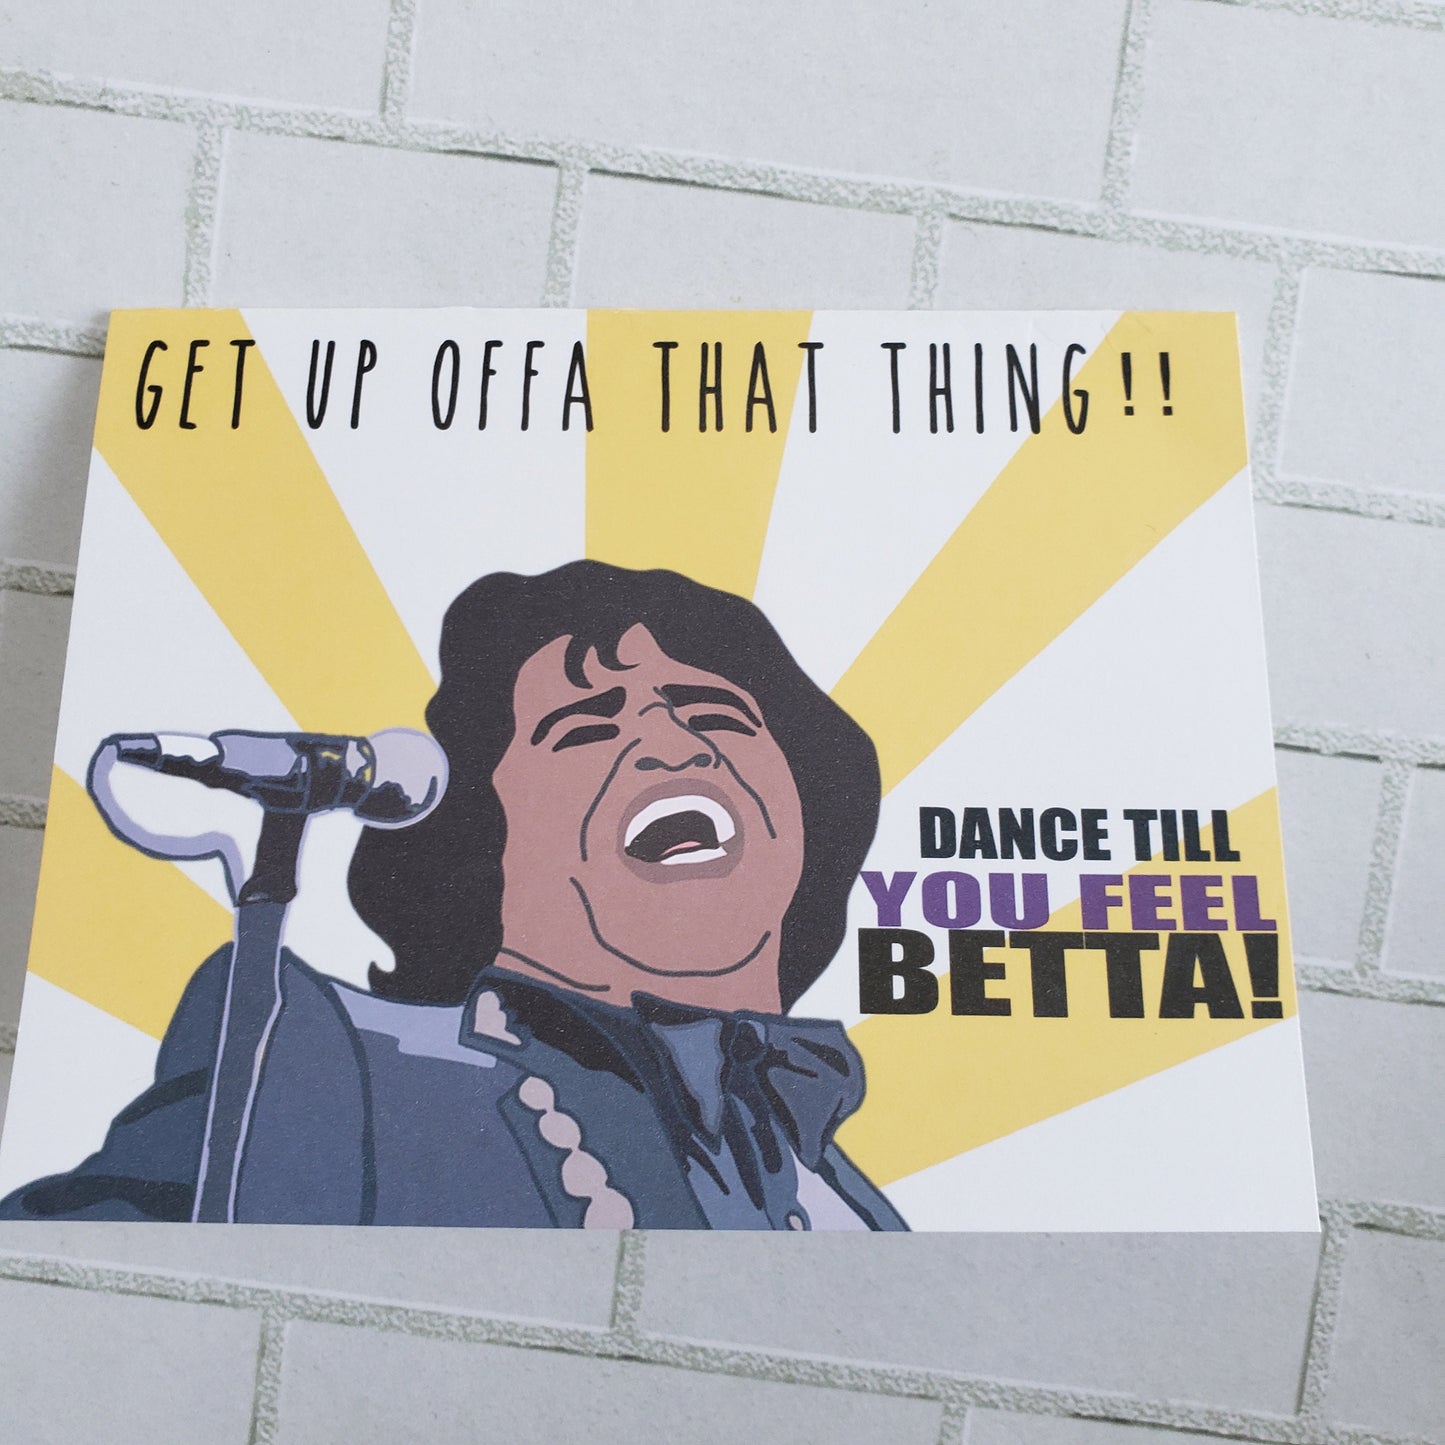 Funny Get Well Card, Encouragement Card, James Brown, Get Up Offa That Thing, Funny Card, Hand Drawn Print